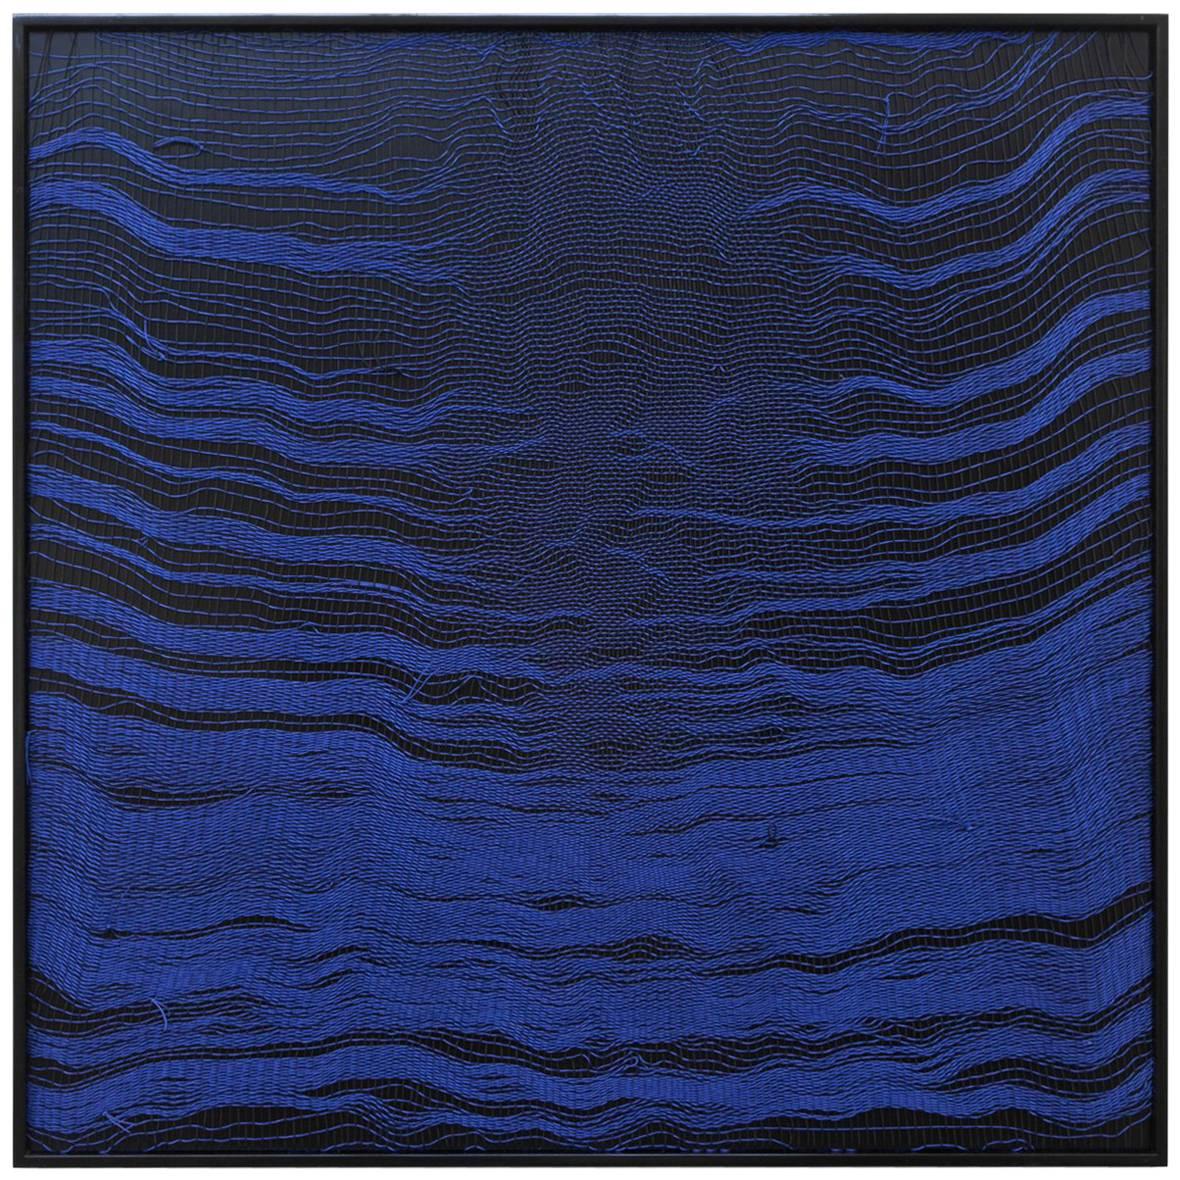 Contemporary Weaving Textile Art, Blue Waves 2 by Mimi Jung For Sale